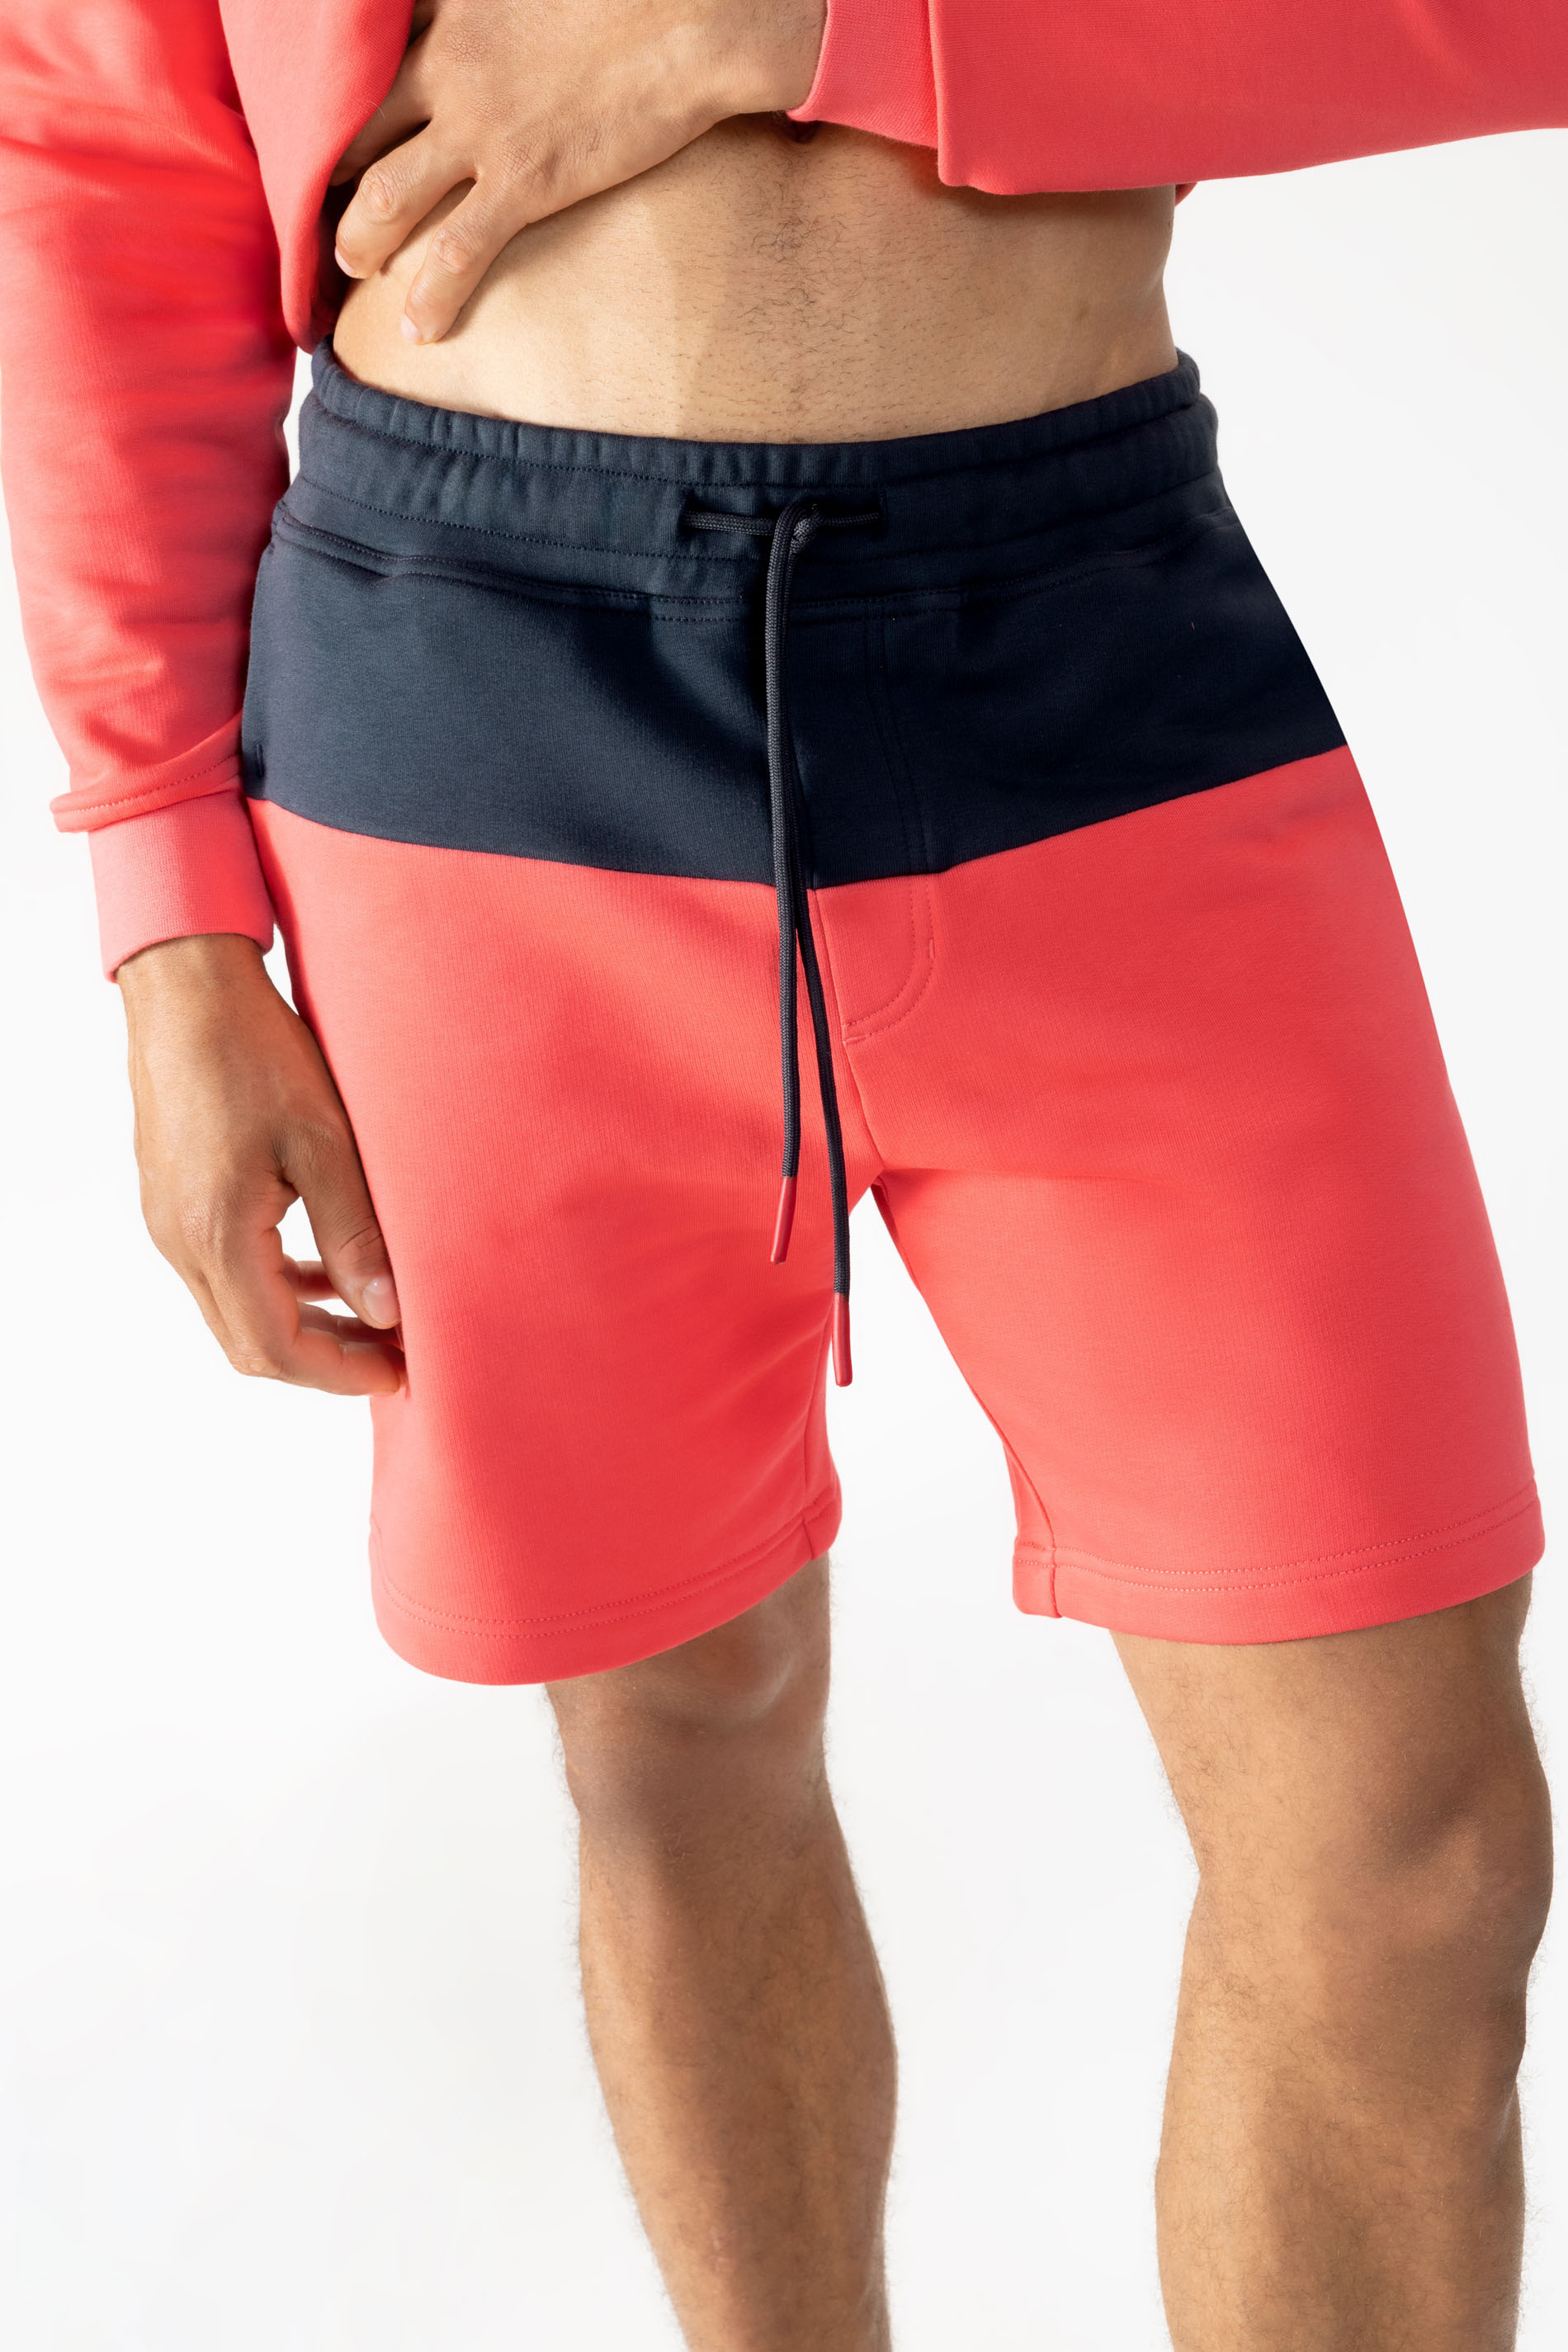 Track shorts Serie Lido Detail View 01 | mey®